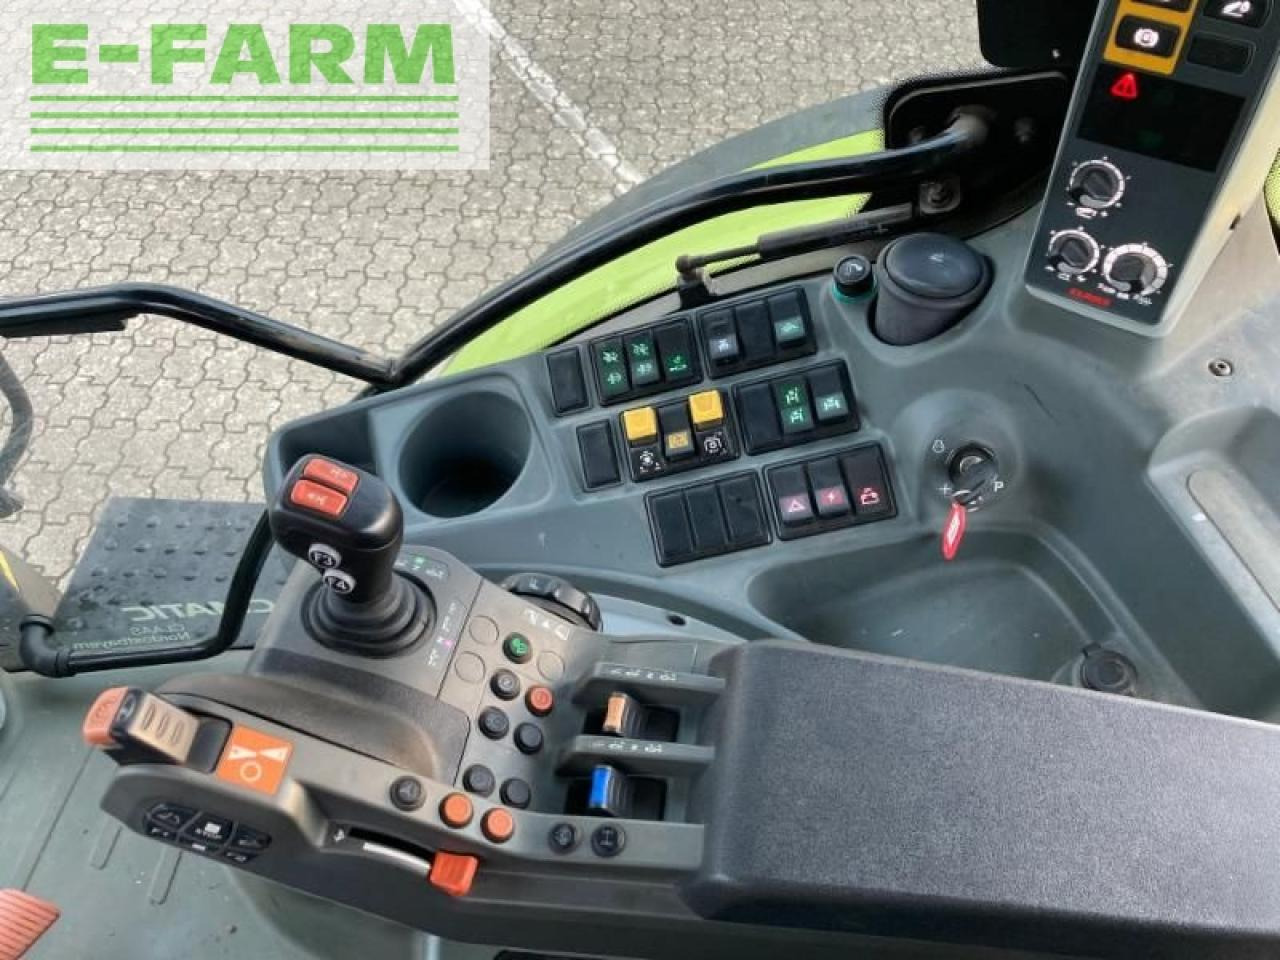 Farm tractor CLAAS arion 550 st4 cmatic